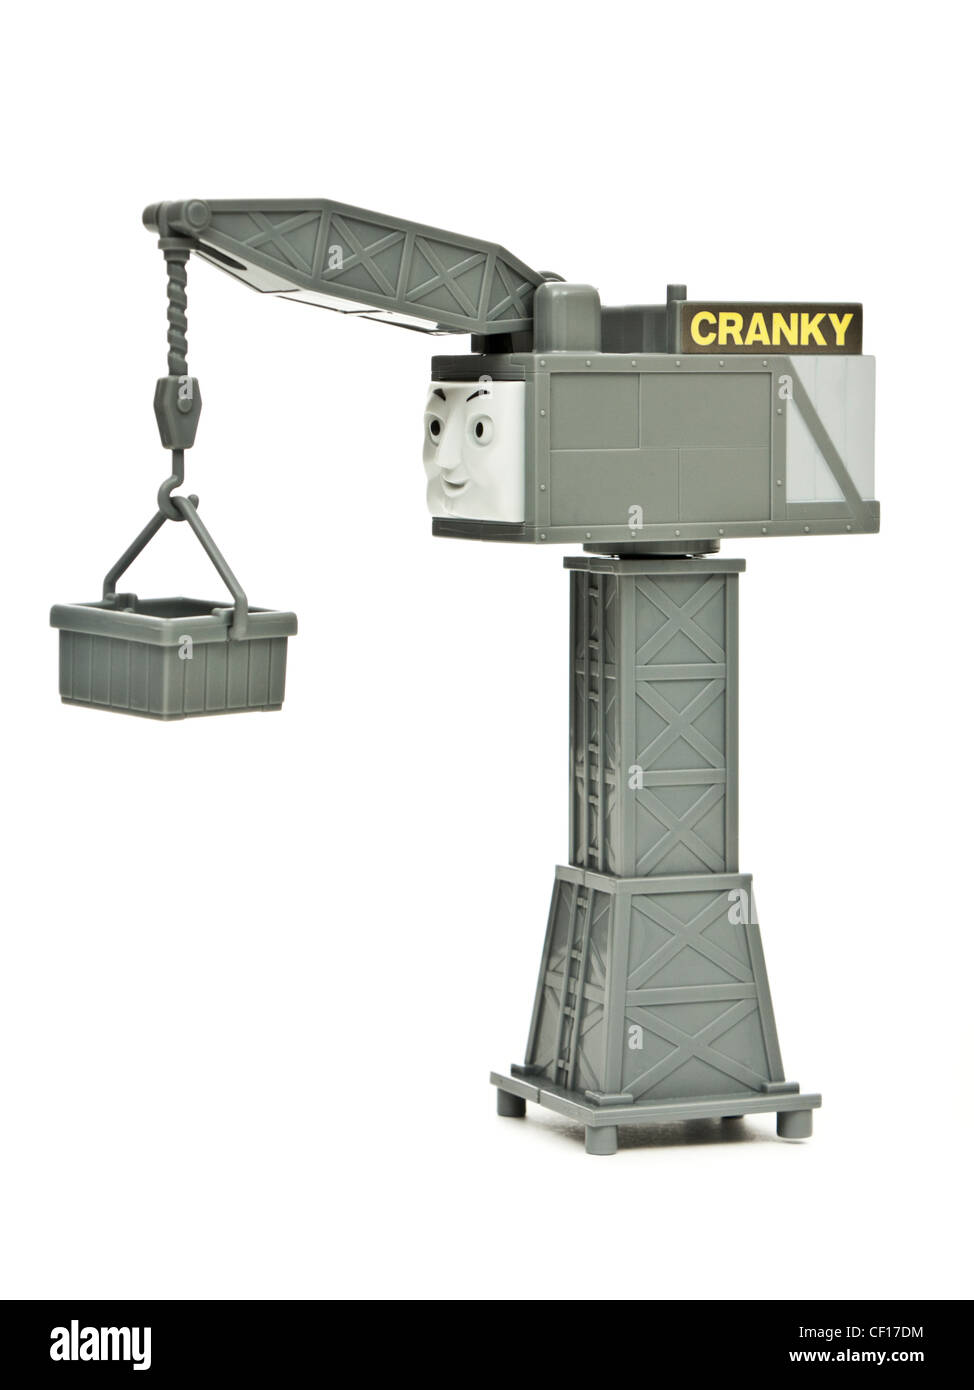 'Cranky' the crane, from the popular 'Thomas the Tank Engine' train set based on the TV series Stock Photo